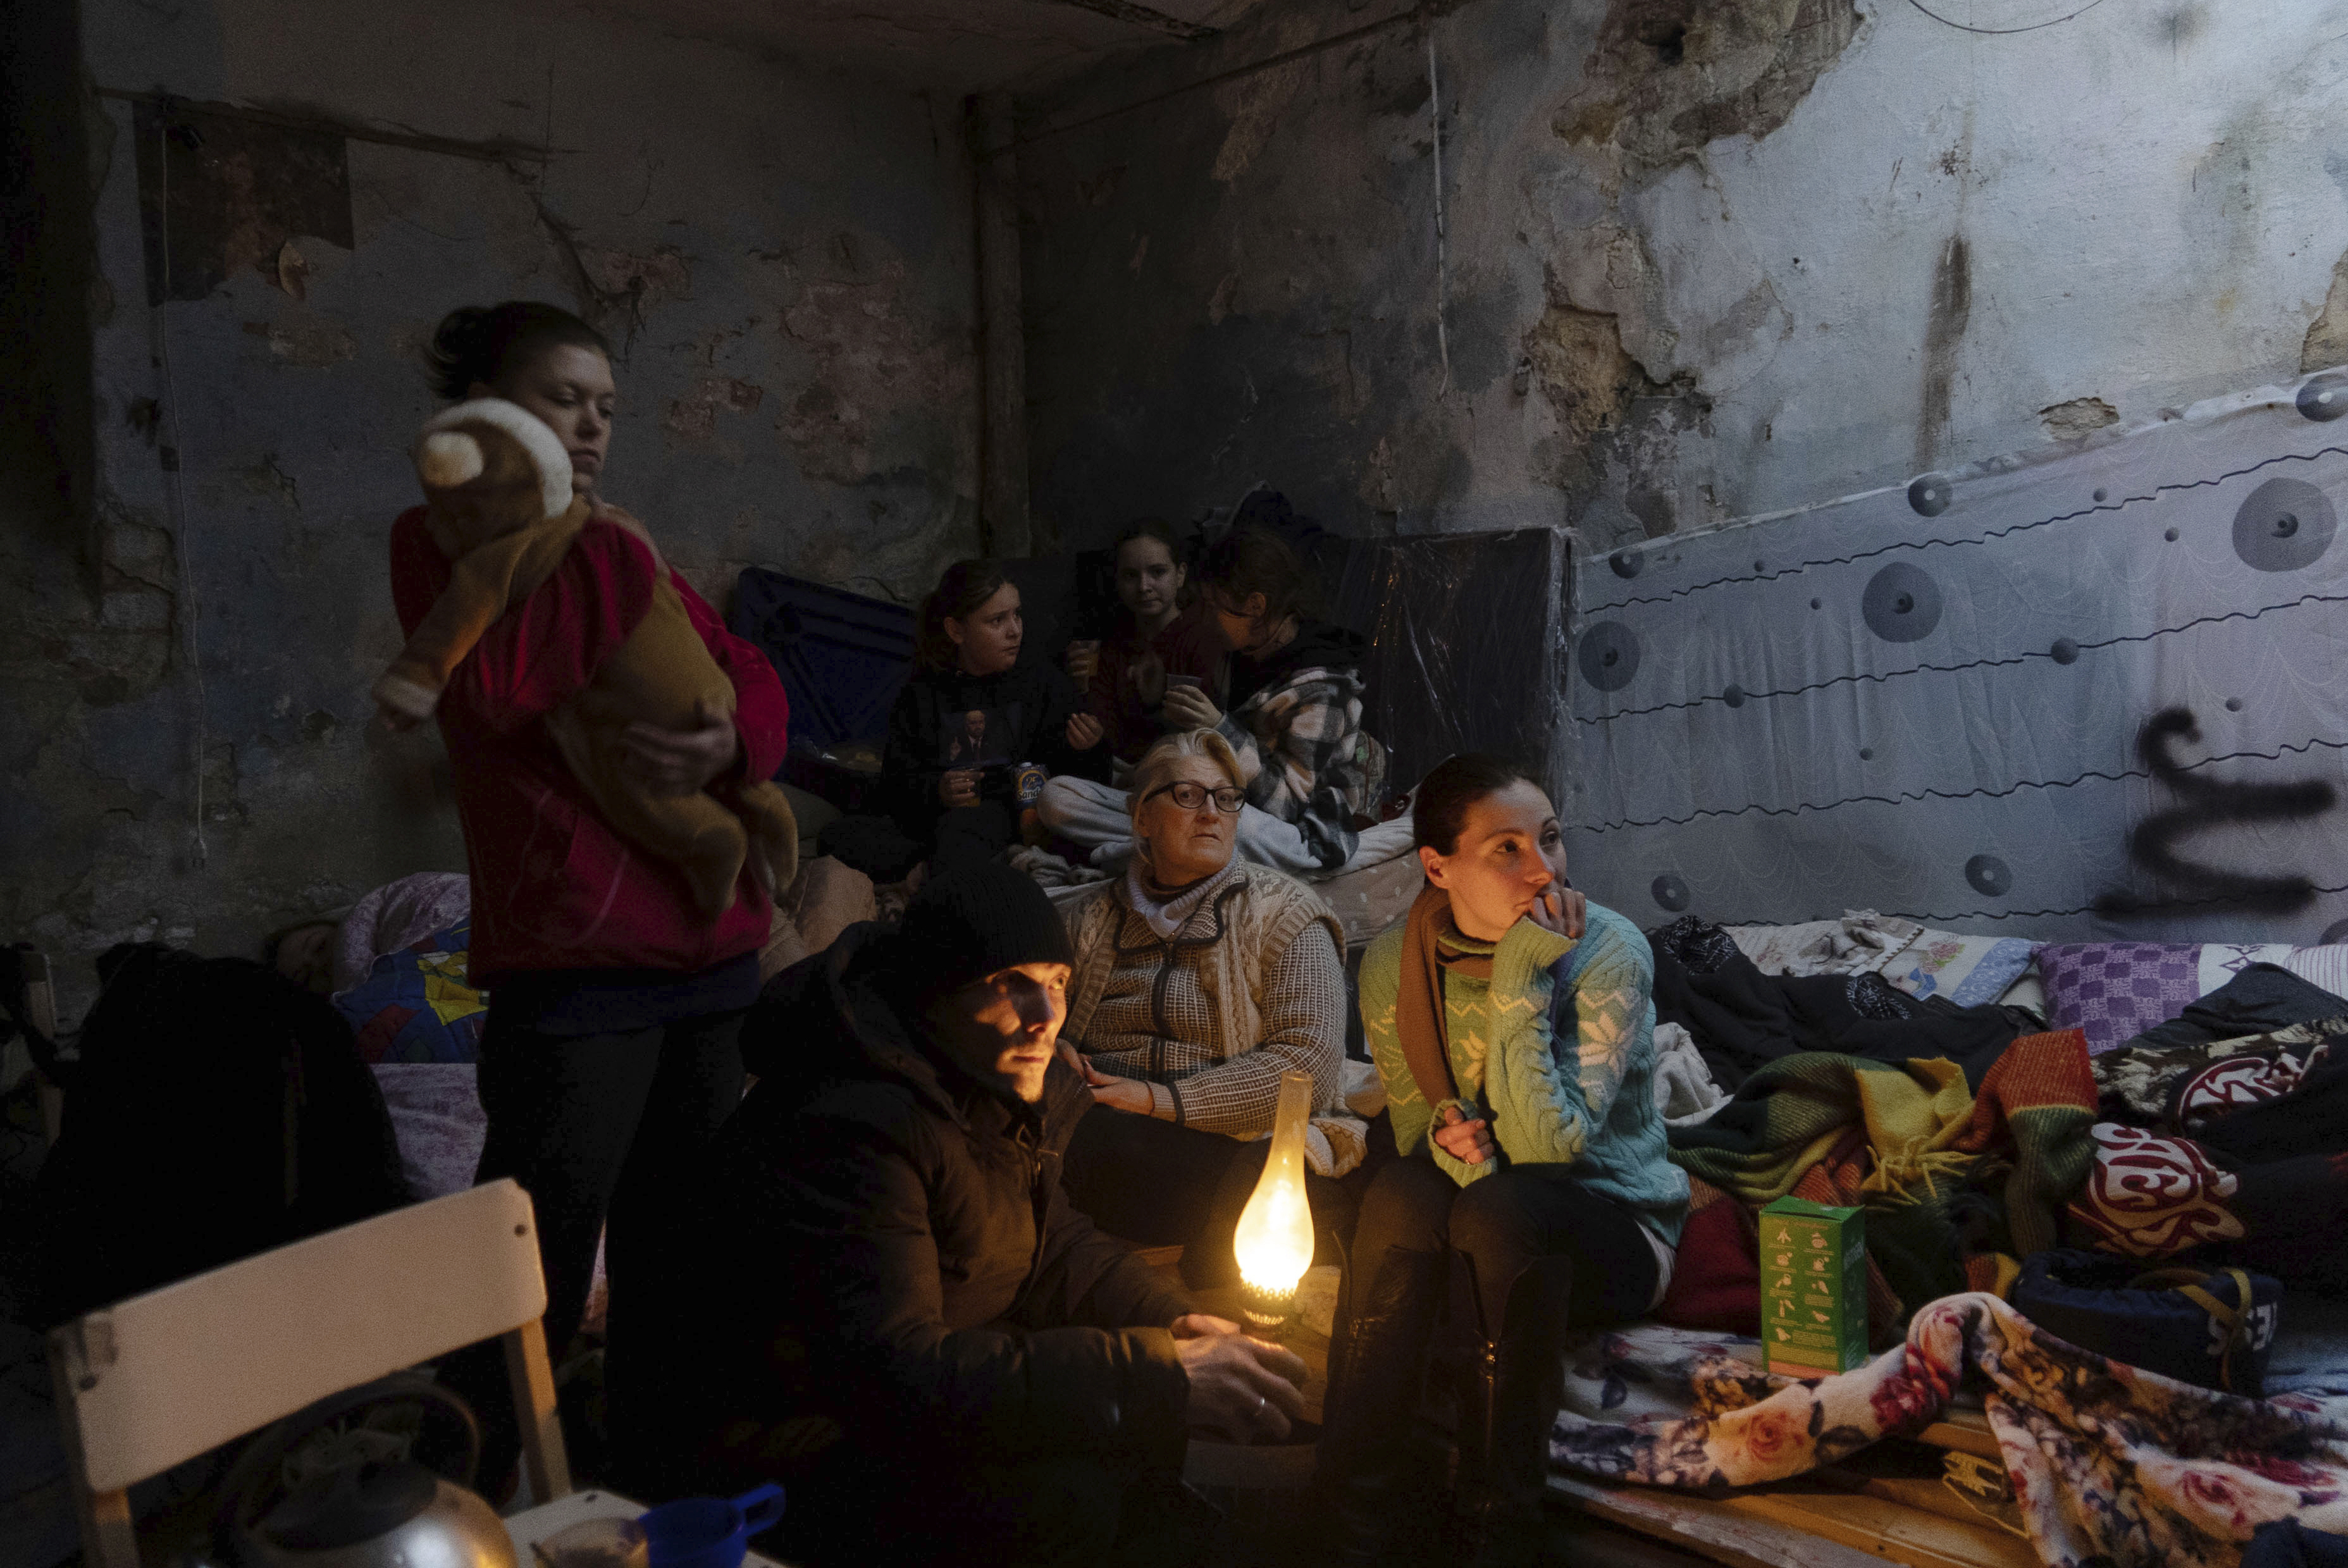 People settle in a bomb shelter in Mariupol, Ukraine, Sunday, March 6, 2022.